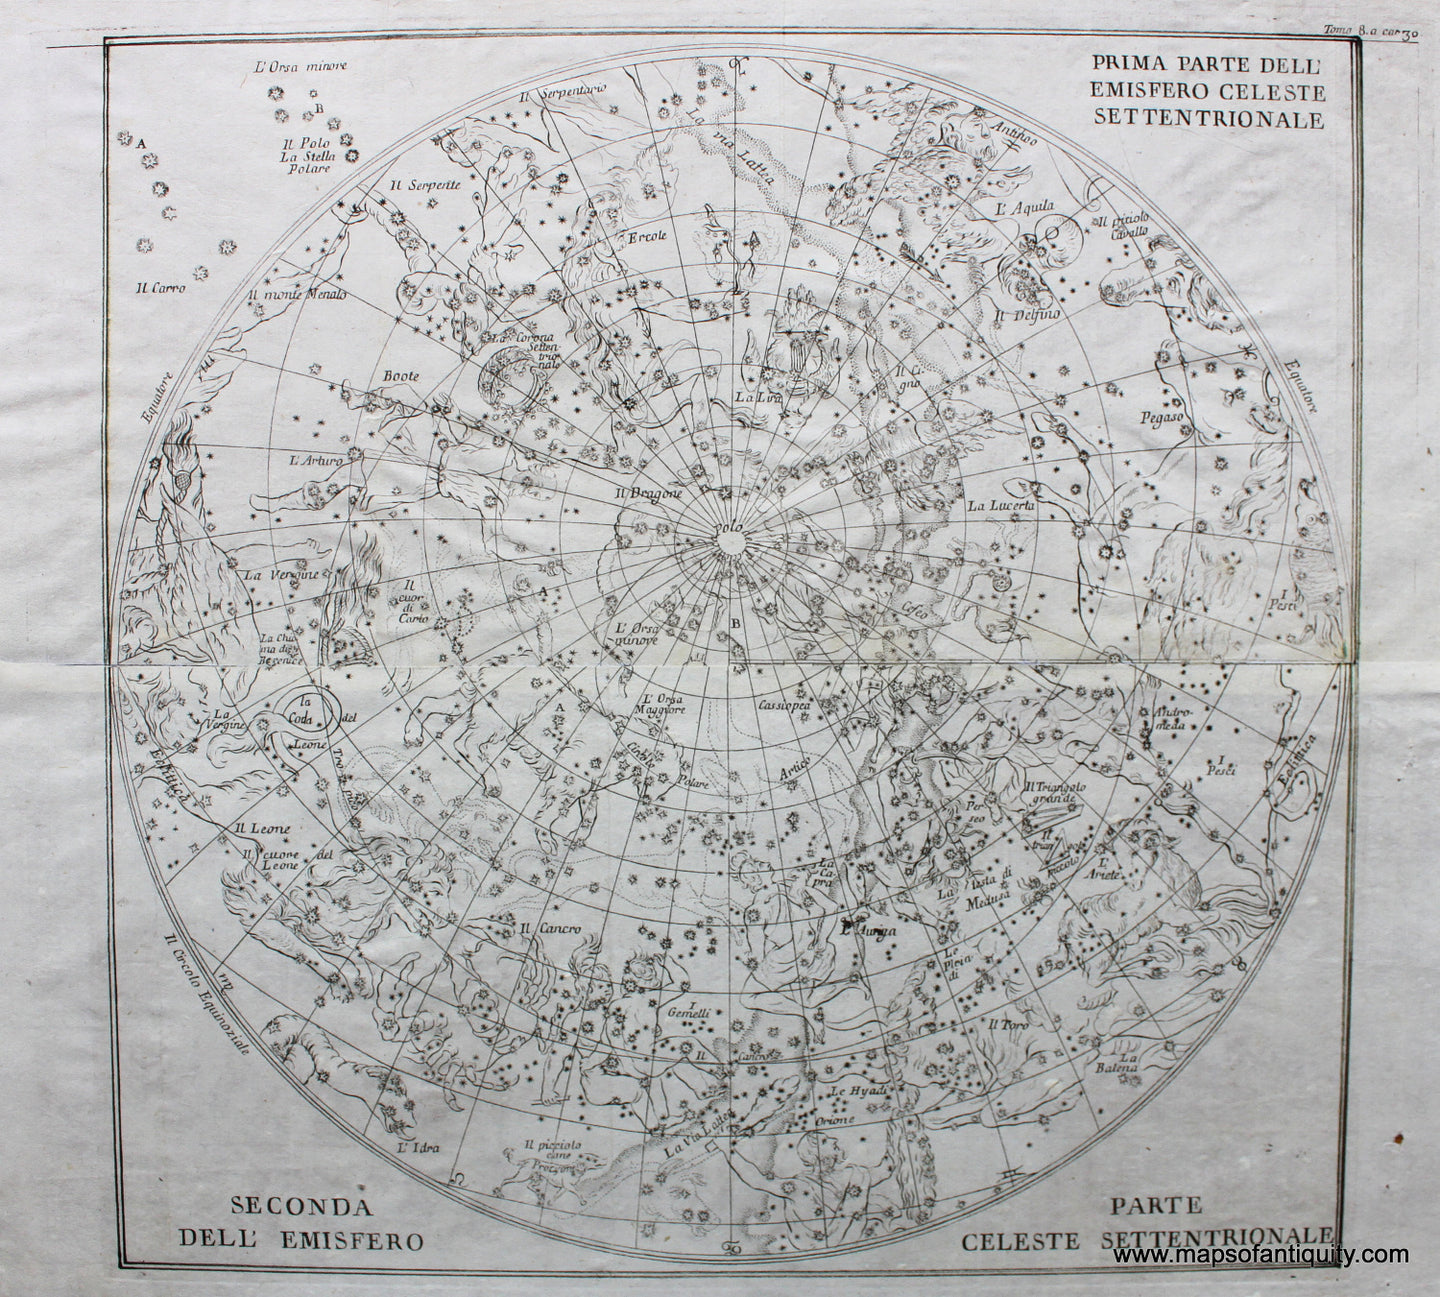 Antique-Black-and-White-Celestial-Map-Celeste-Settentrionale---Constellations-of-the-Northern-Hemisphere-**********-Celestial--1760-Pluche-Maps-Of-Antiquity